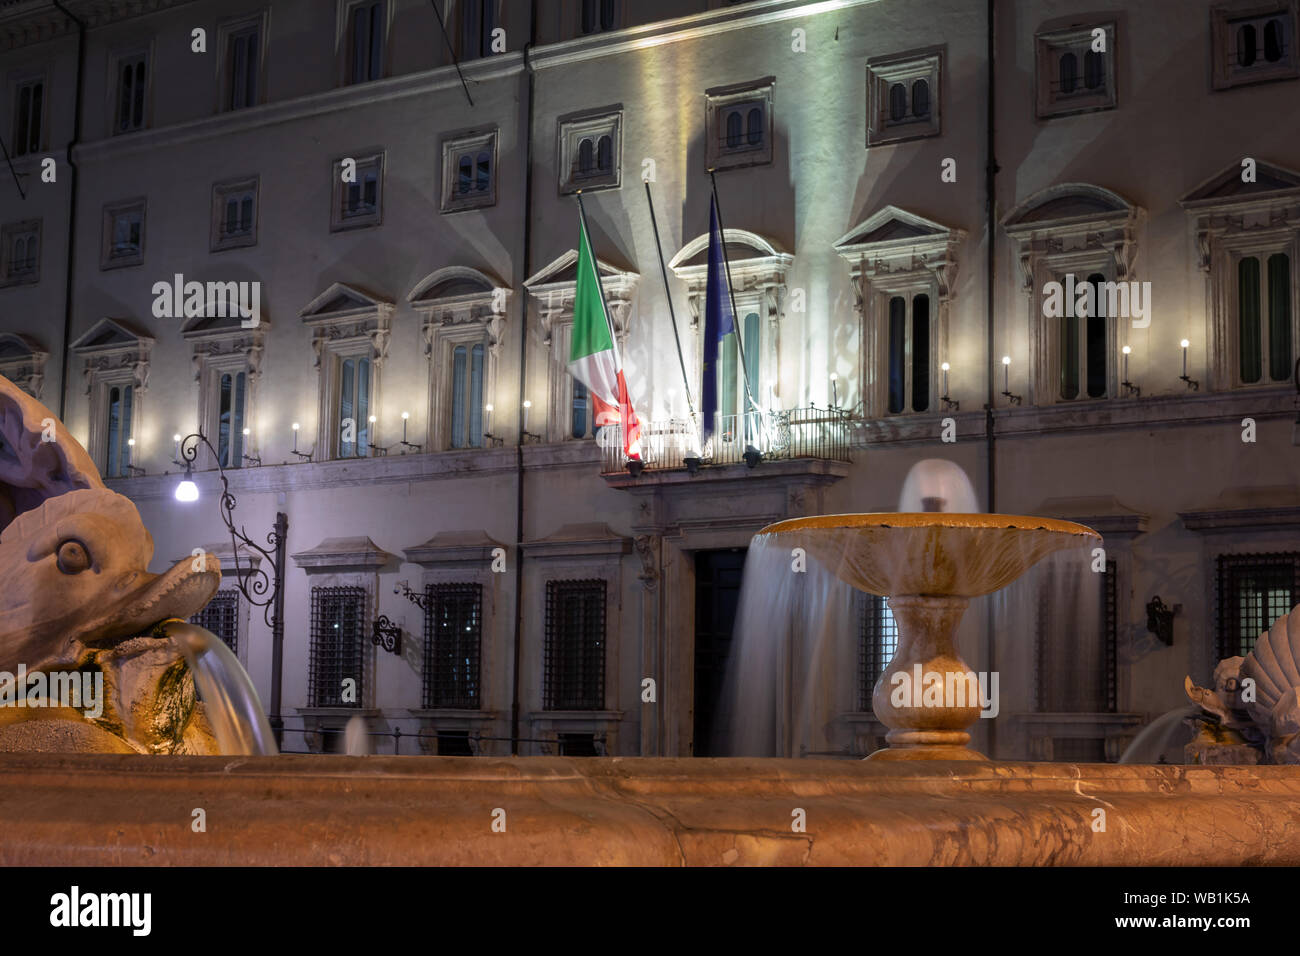 Rome, Italy - August 18, 2019: Palazzo Chigi, institutional seat of the Italian government. The main entrance with the building facade and flags. Stock Photo